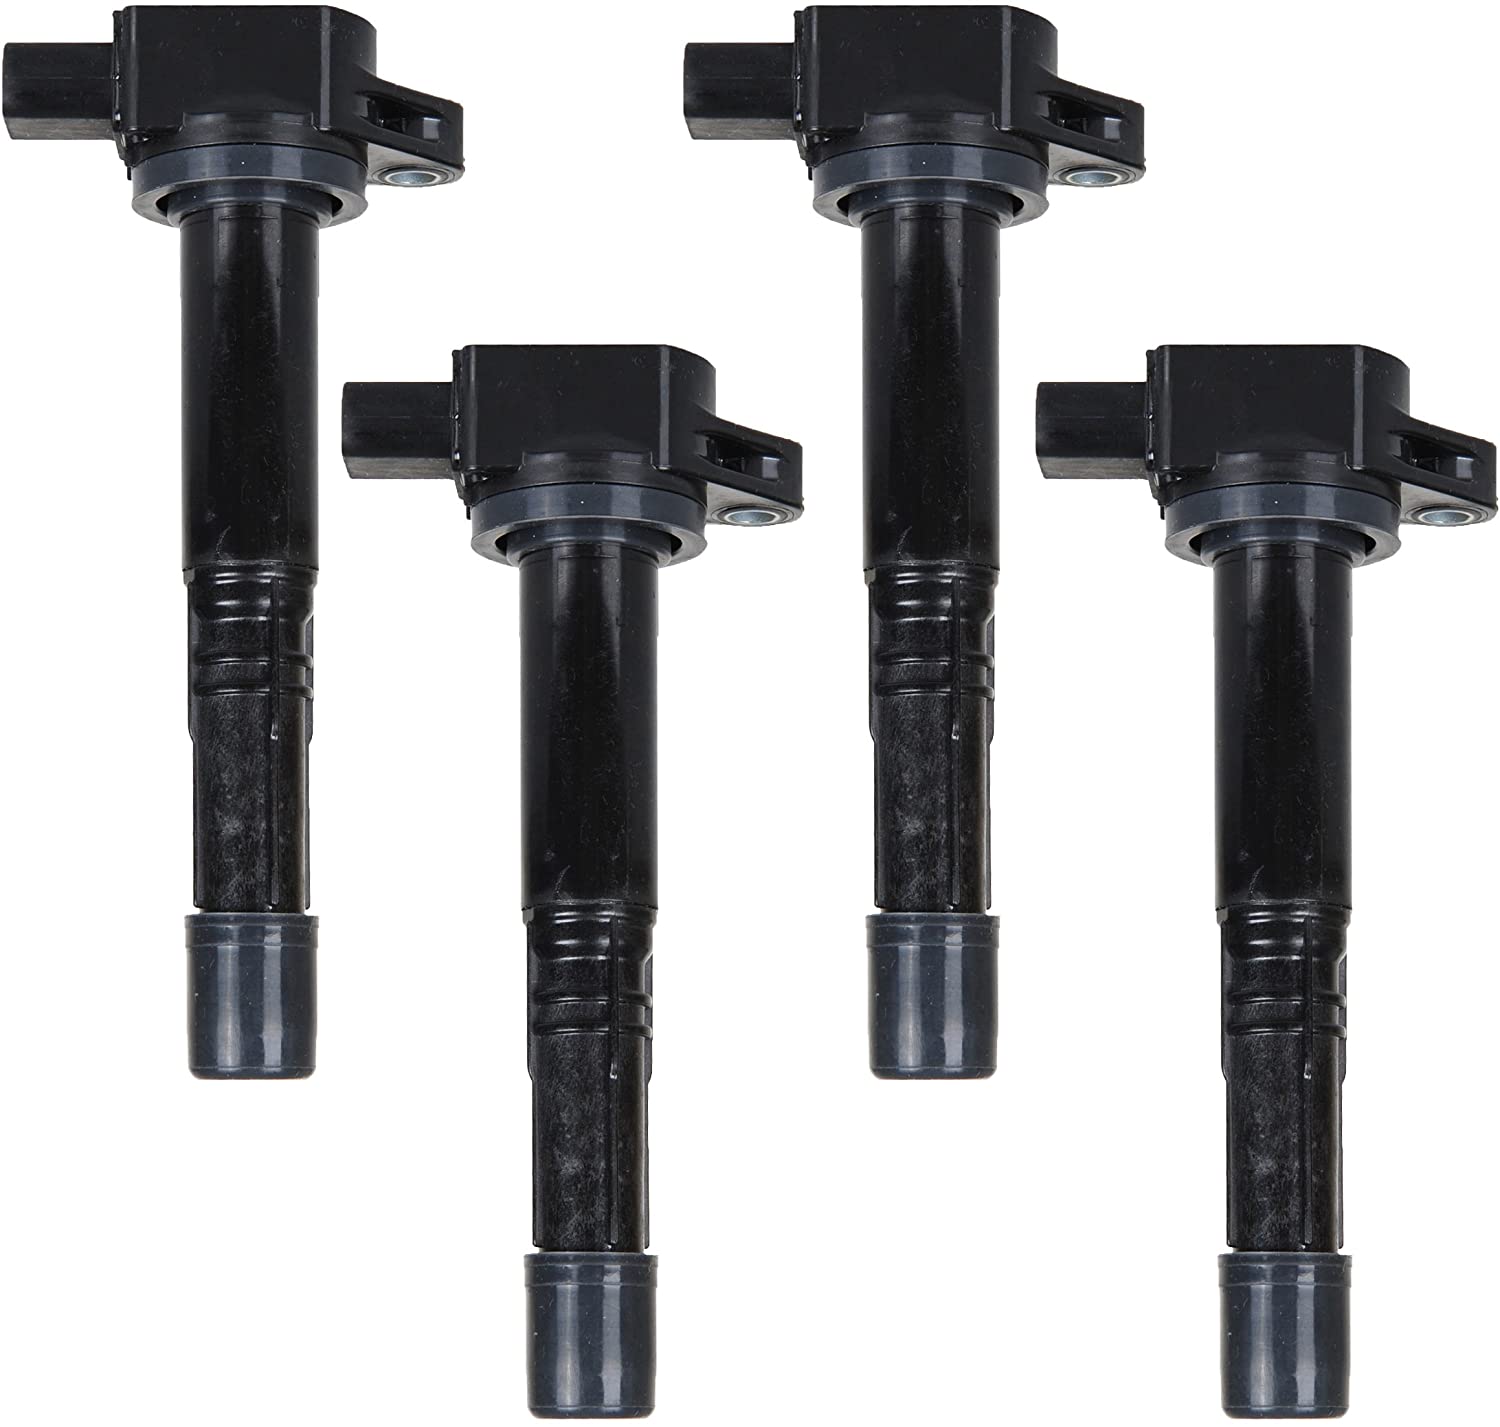 ENA Set of 4 Ignition Coil compatible with 2002-2011 Honda Element CR-V Civic Accord Acura CSX RSX 2.0L 2.4L UF311 UF583 C1382